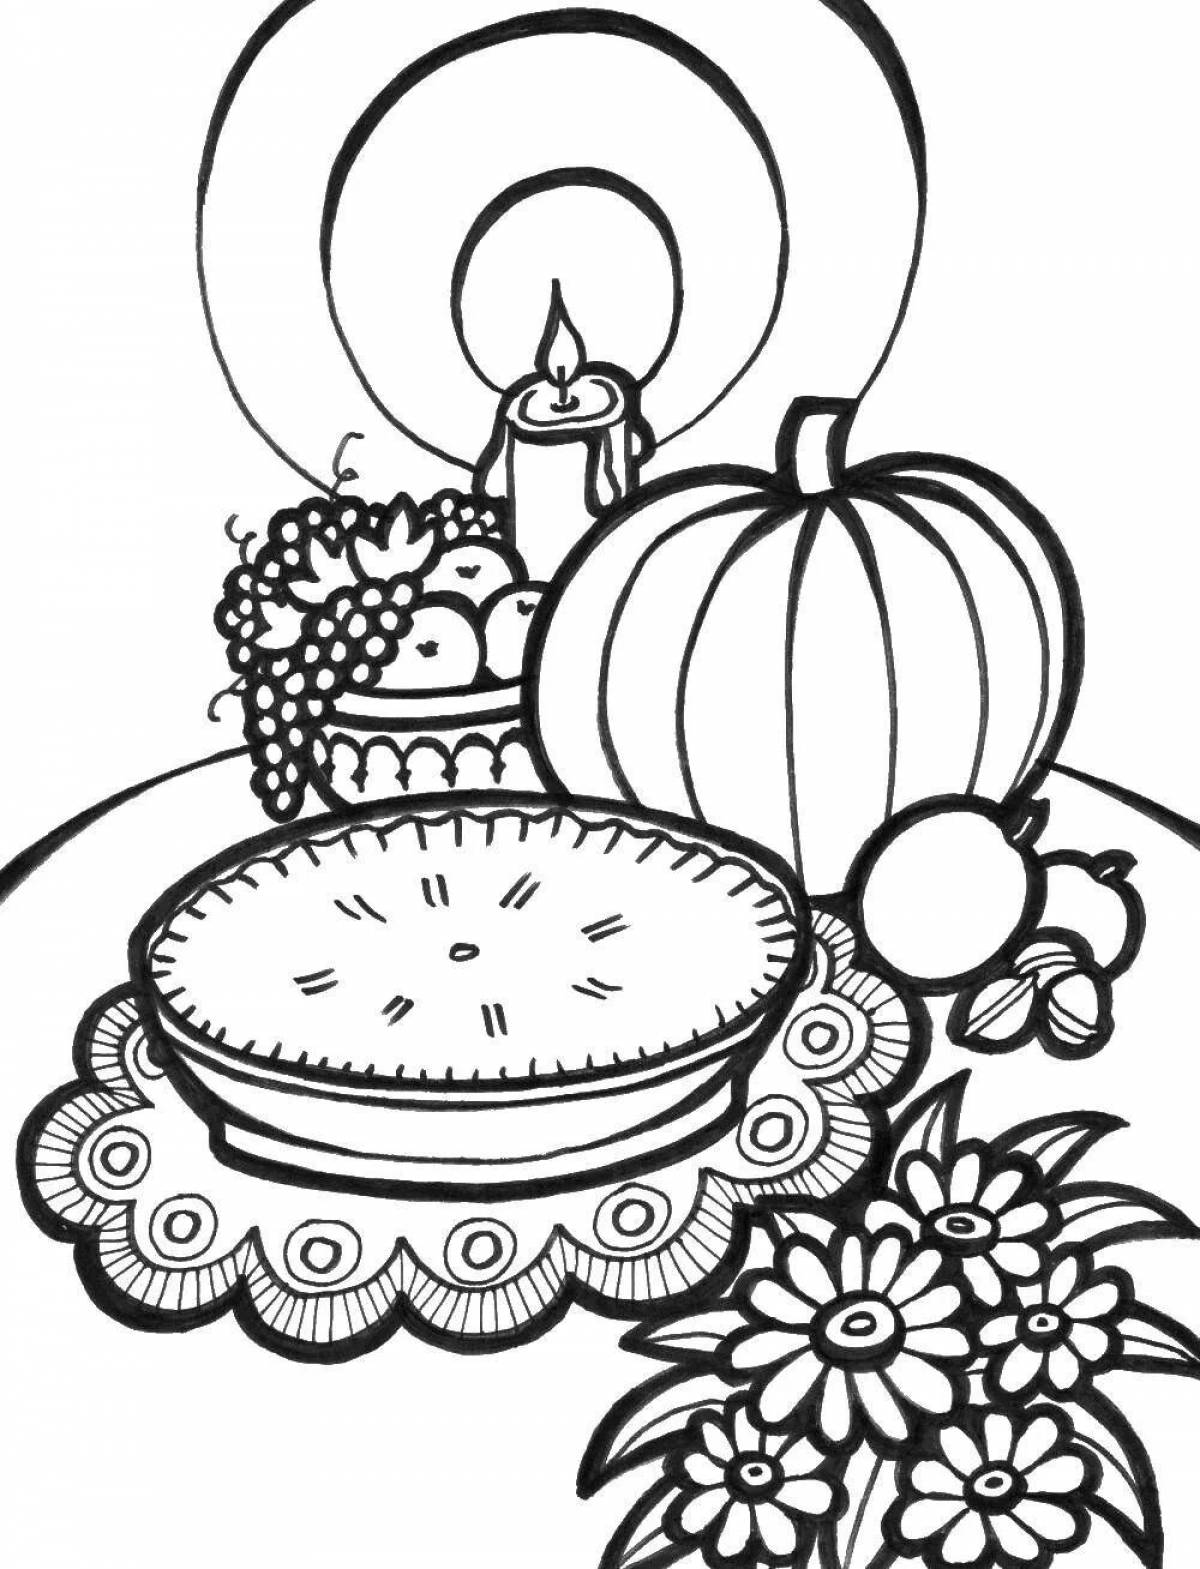 Coloring page stylish russian cuisine